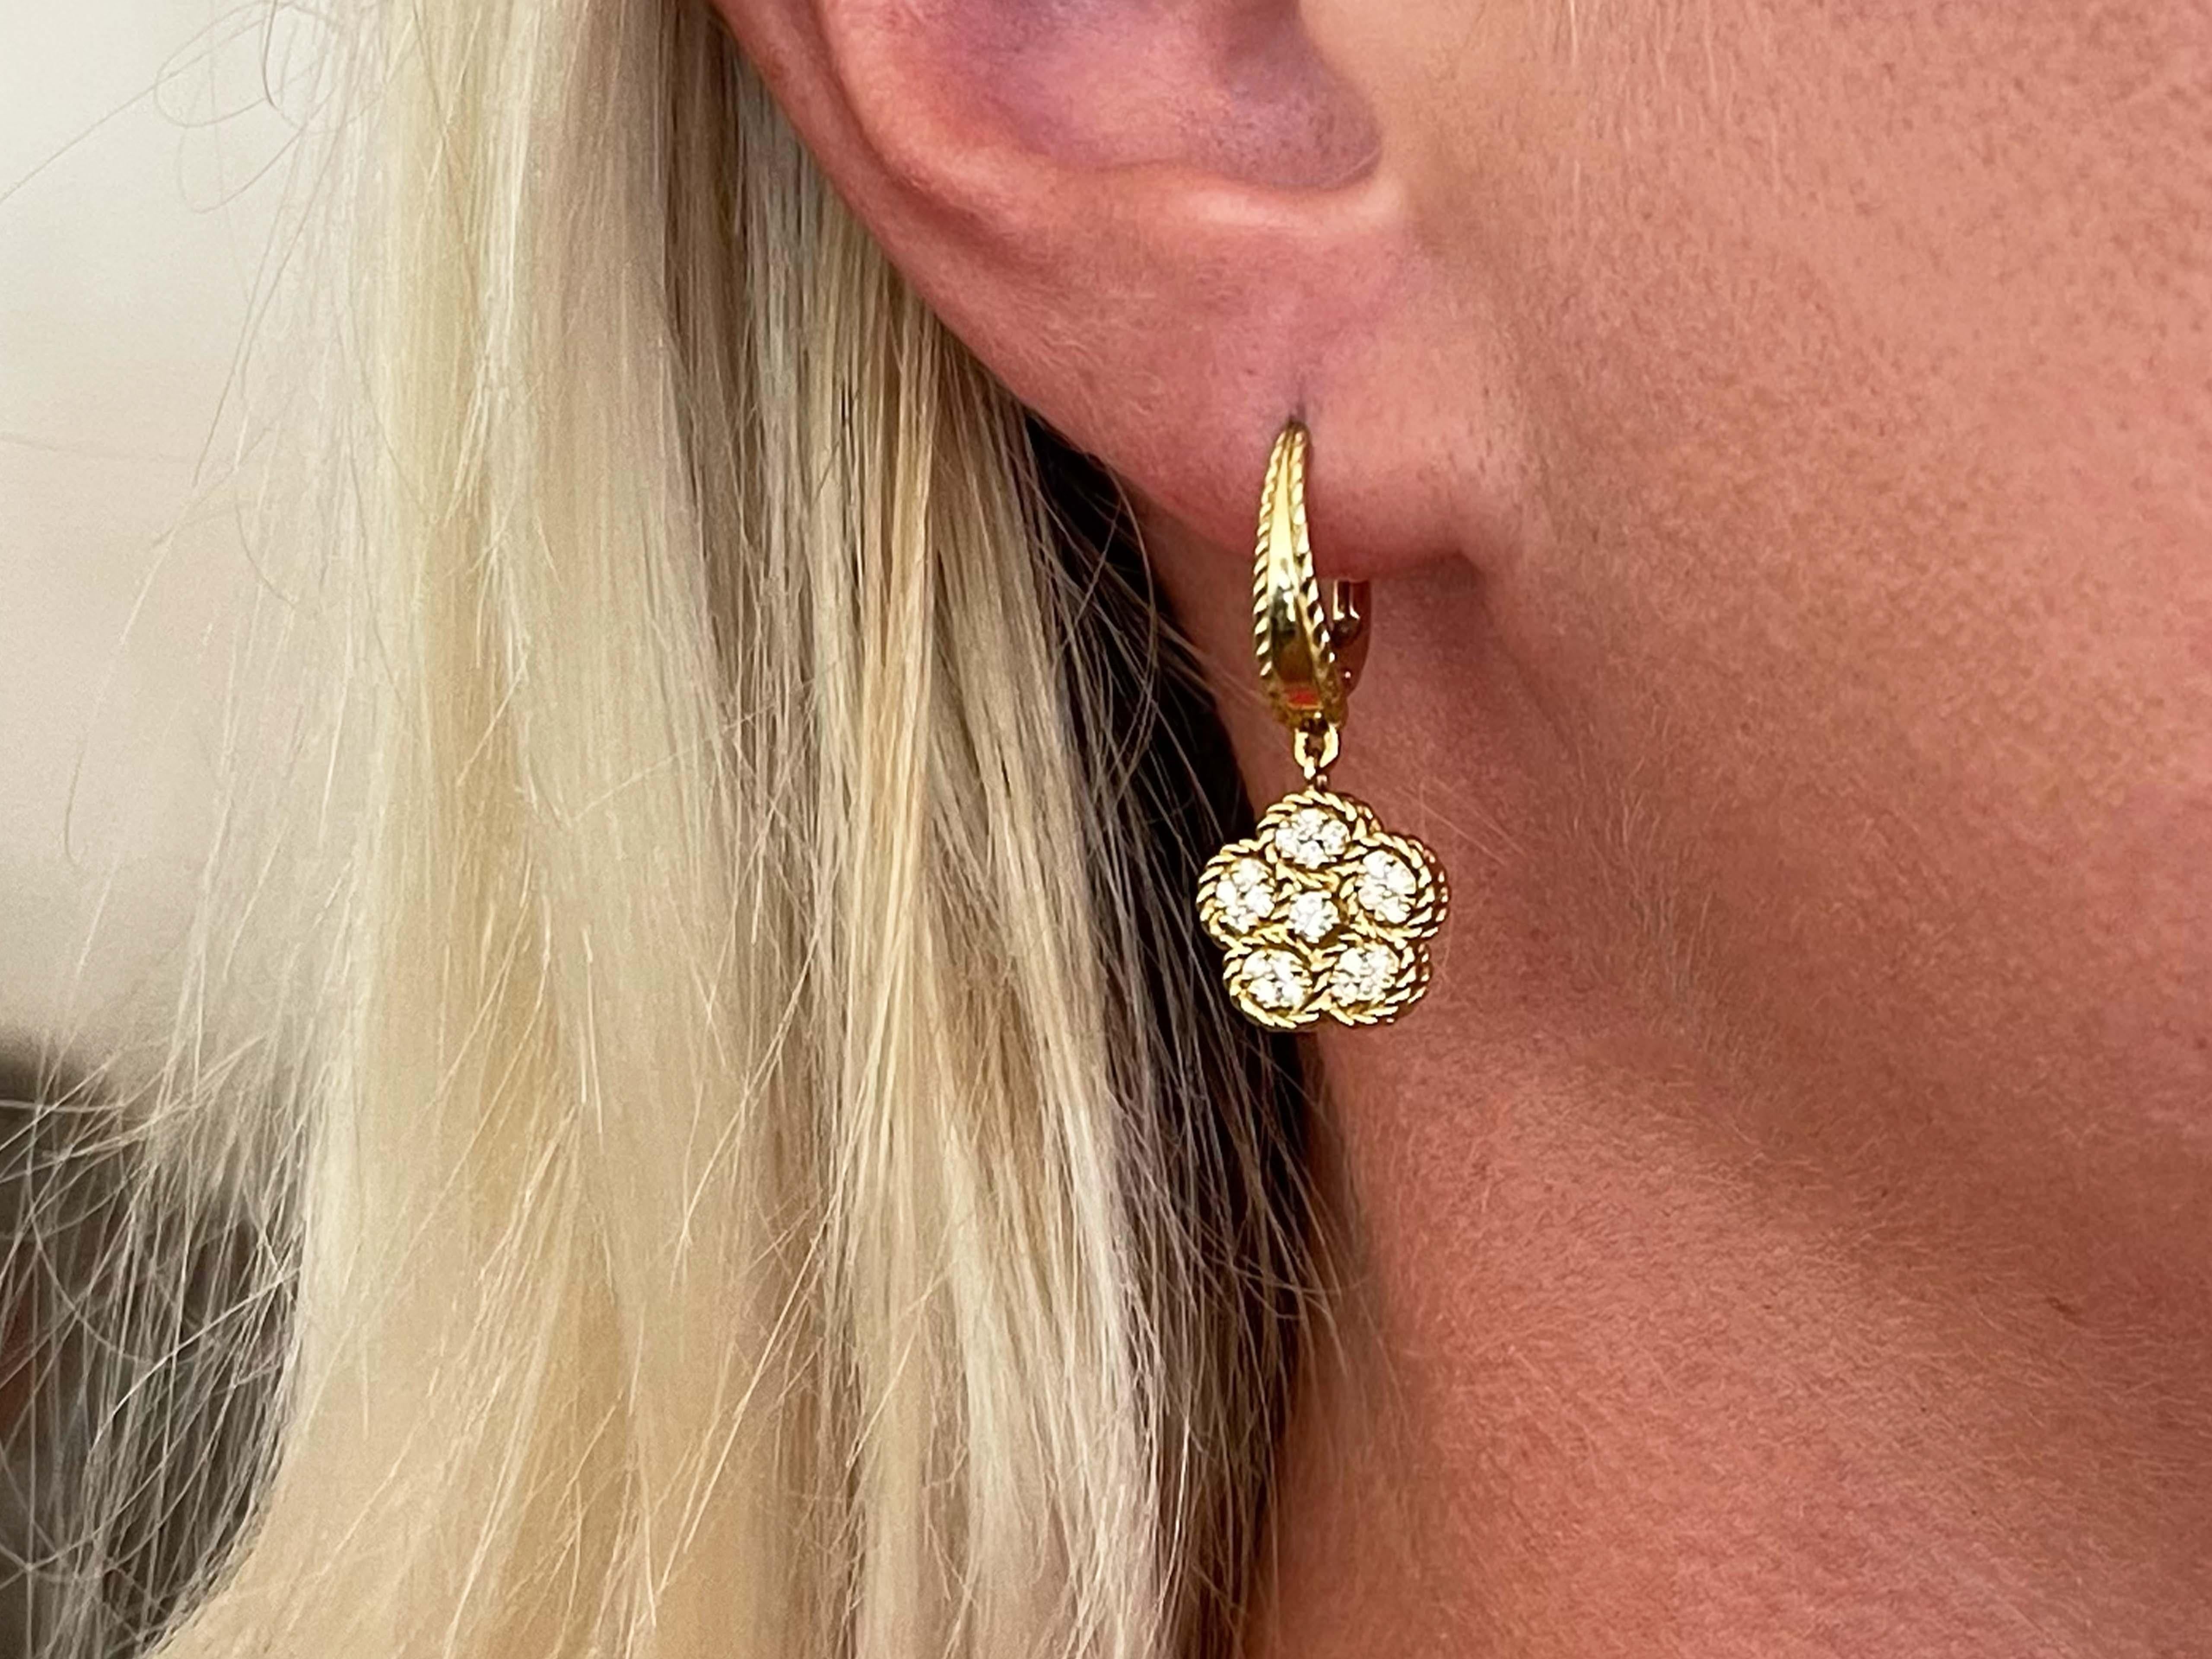 Item Specifications:

Designer: Roberto Coin

Metal: 18k Yellow Gold

Total Weight: 6.7 Grams

Diamond Color: G

Diamond Clarity: VS

Diamond Carat Weight: 0.35

Diamond Count: 42 round brilliant cut

Daisy Diameter: 11.29 mm

Stamped: 